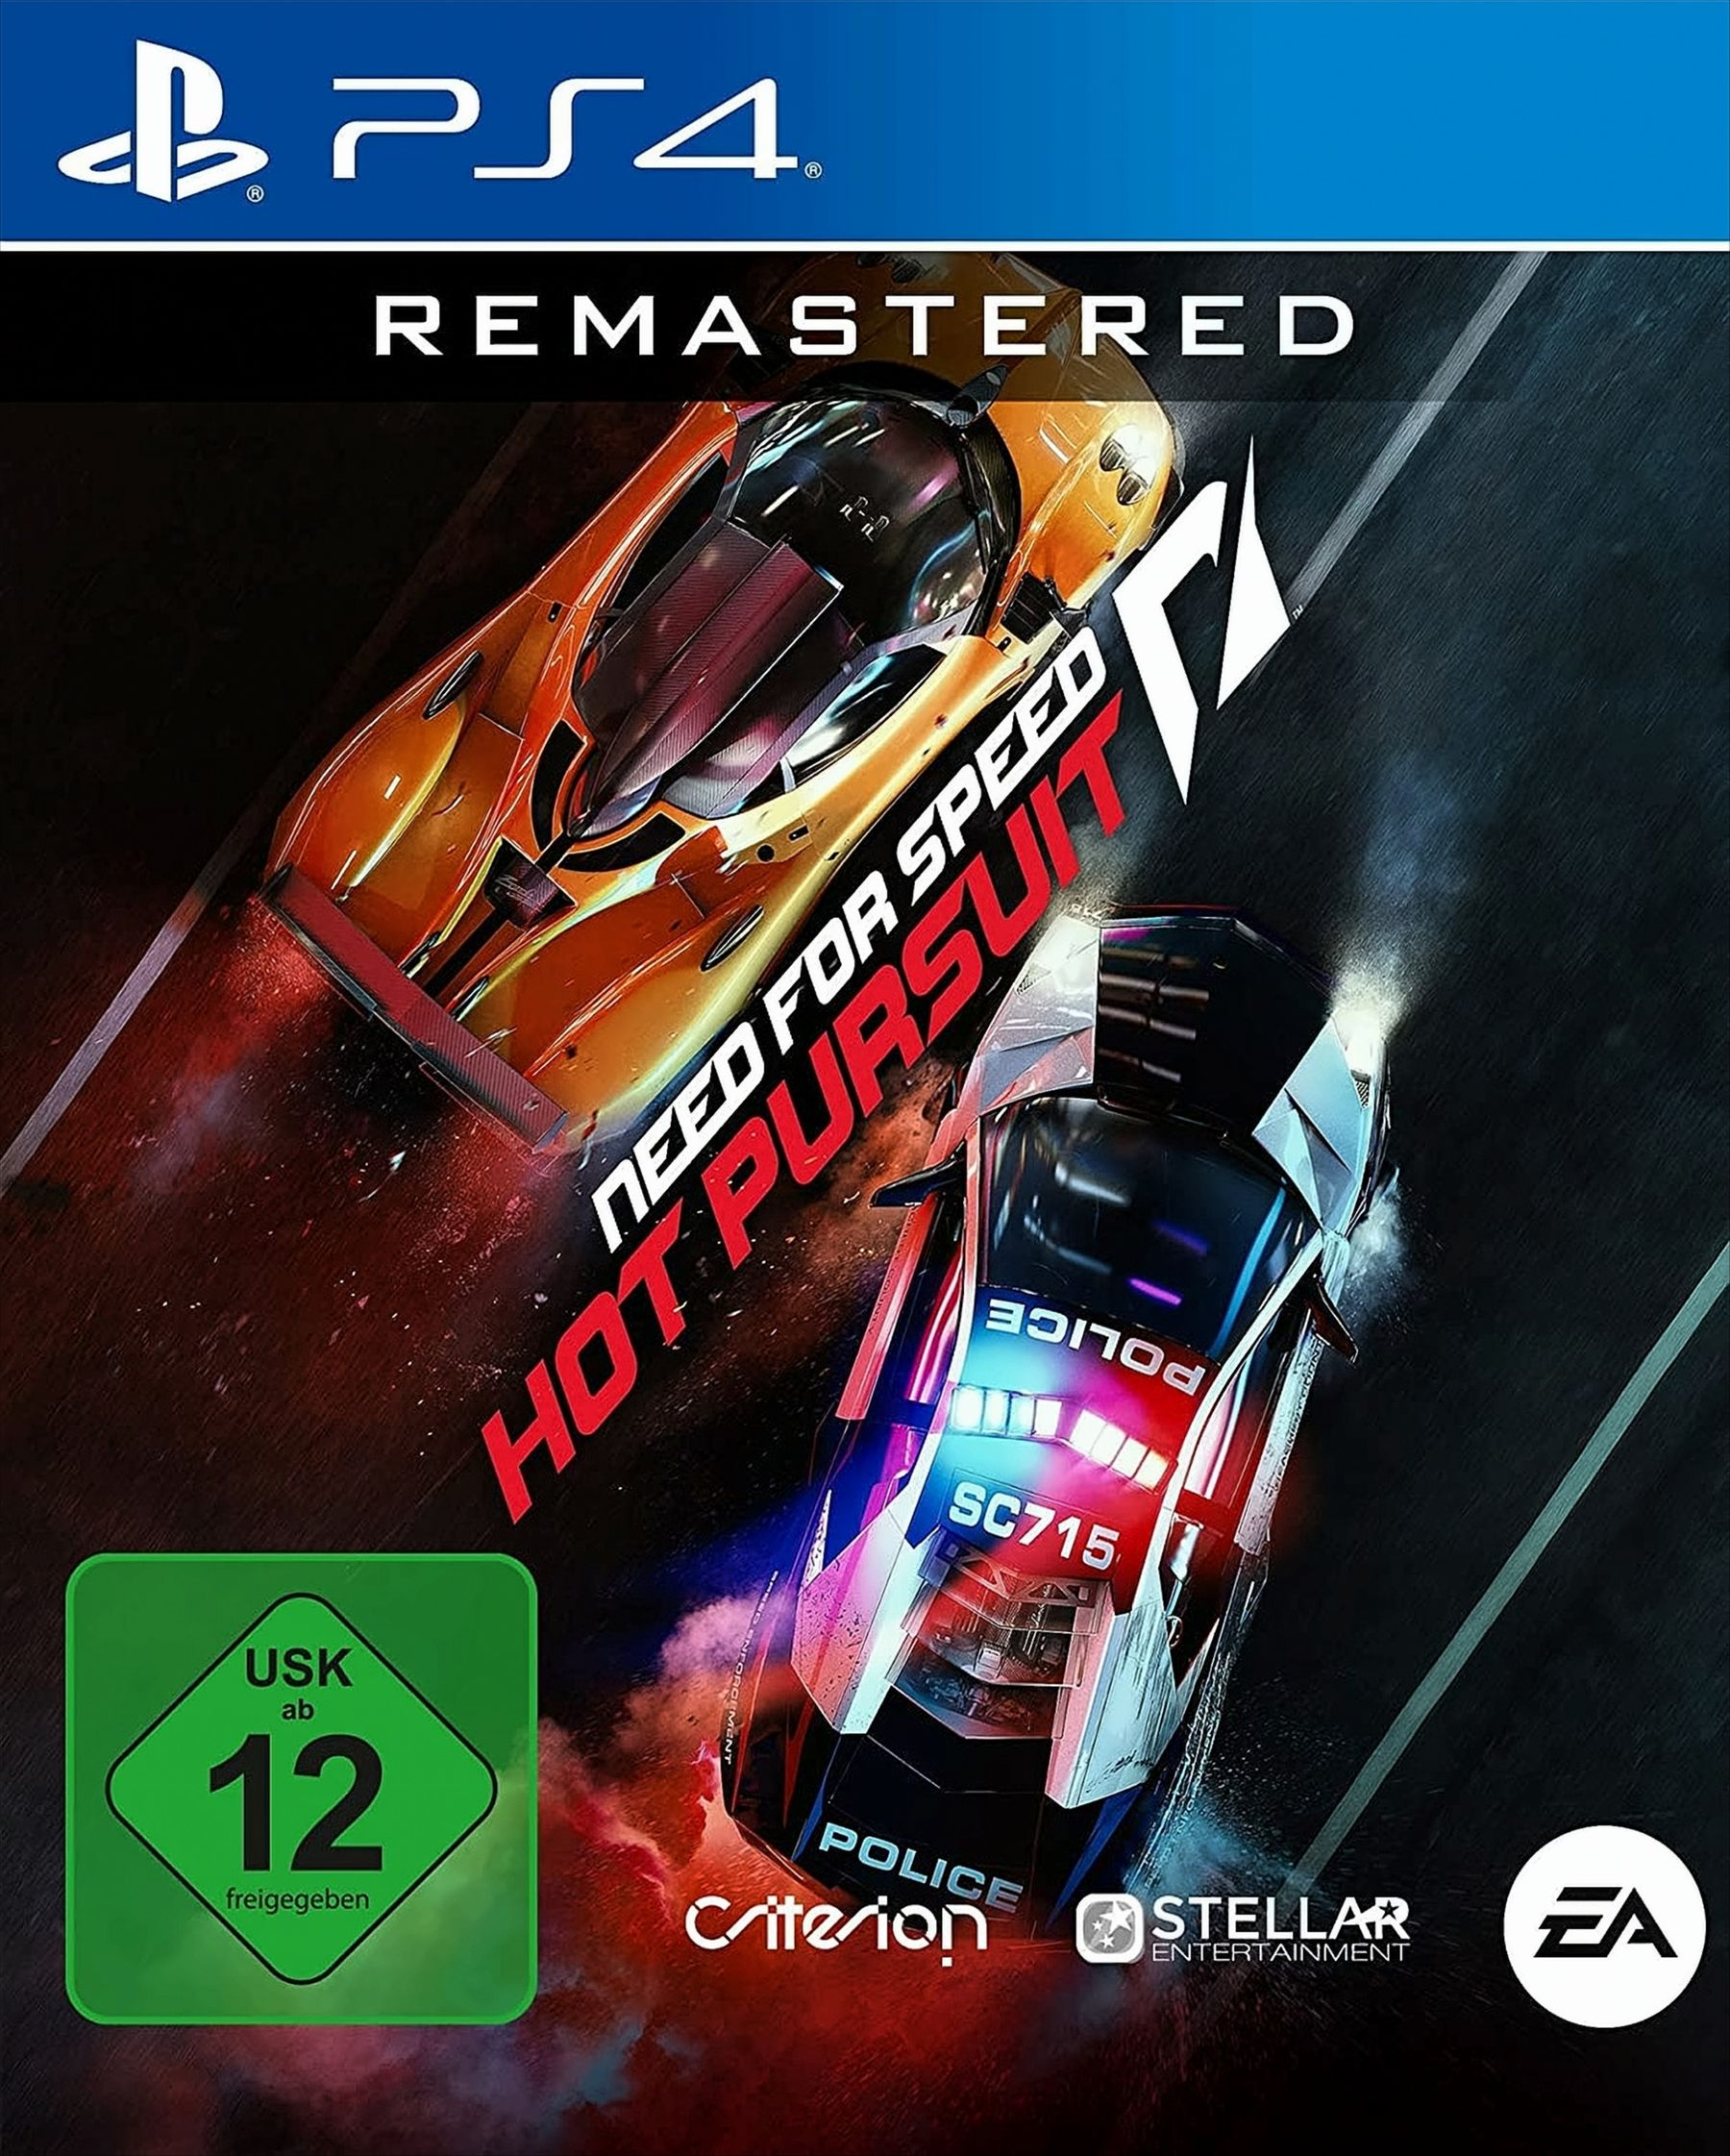 4] Remastered - [PlayStation Hot Pursuit NFS PS-4